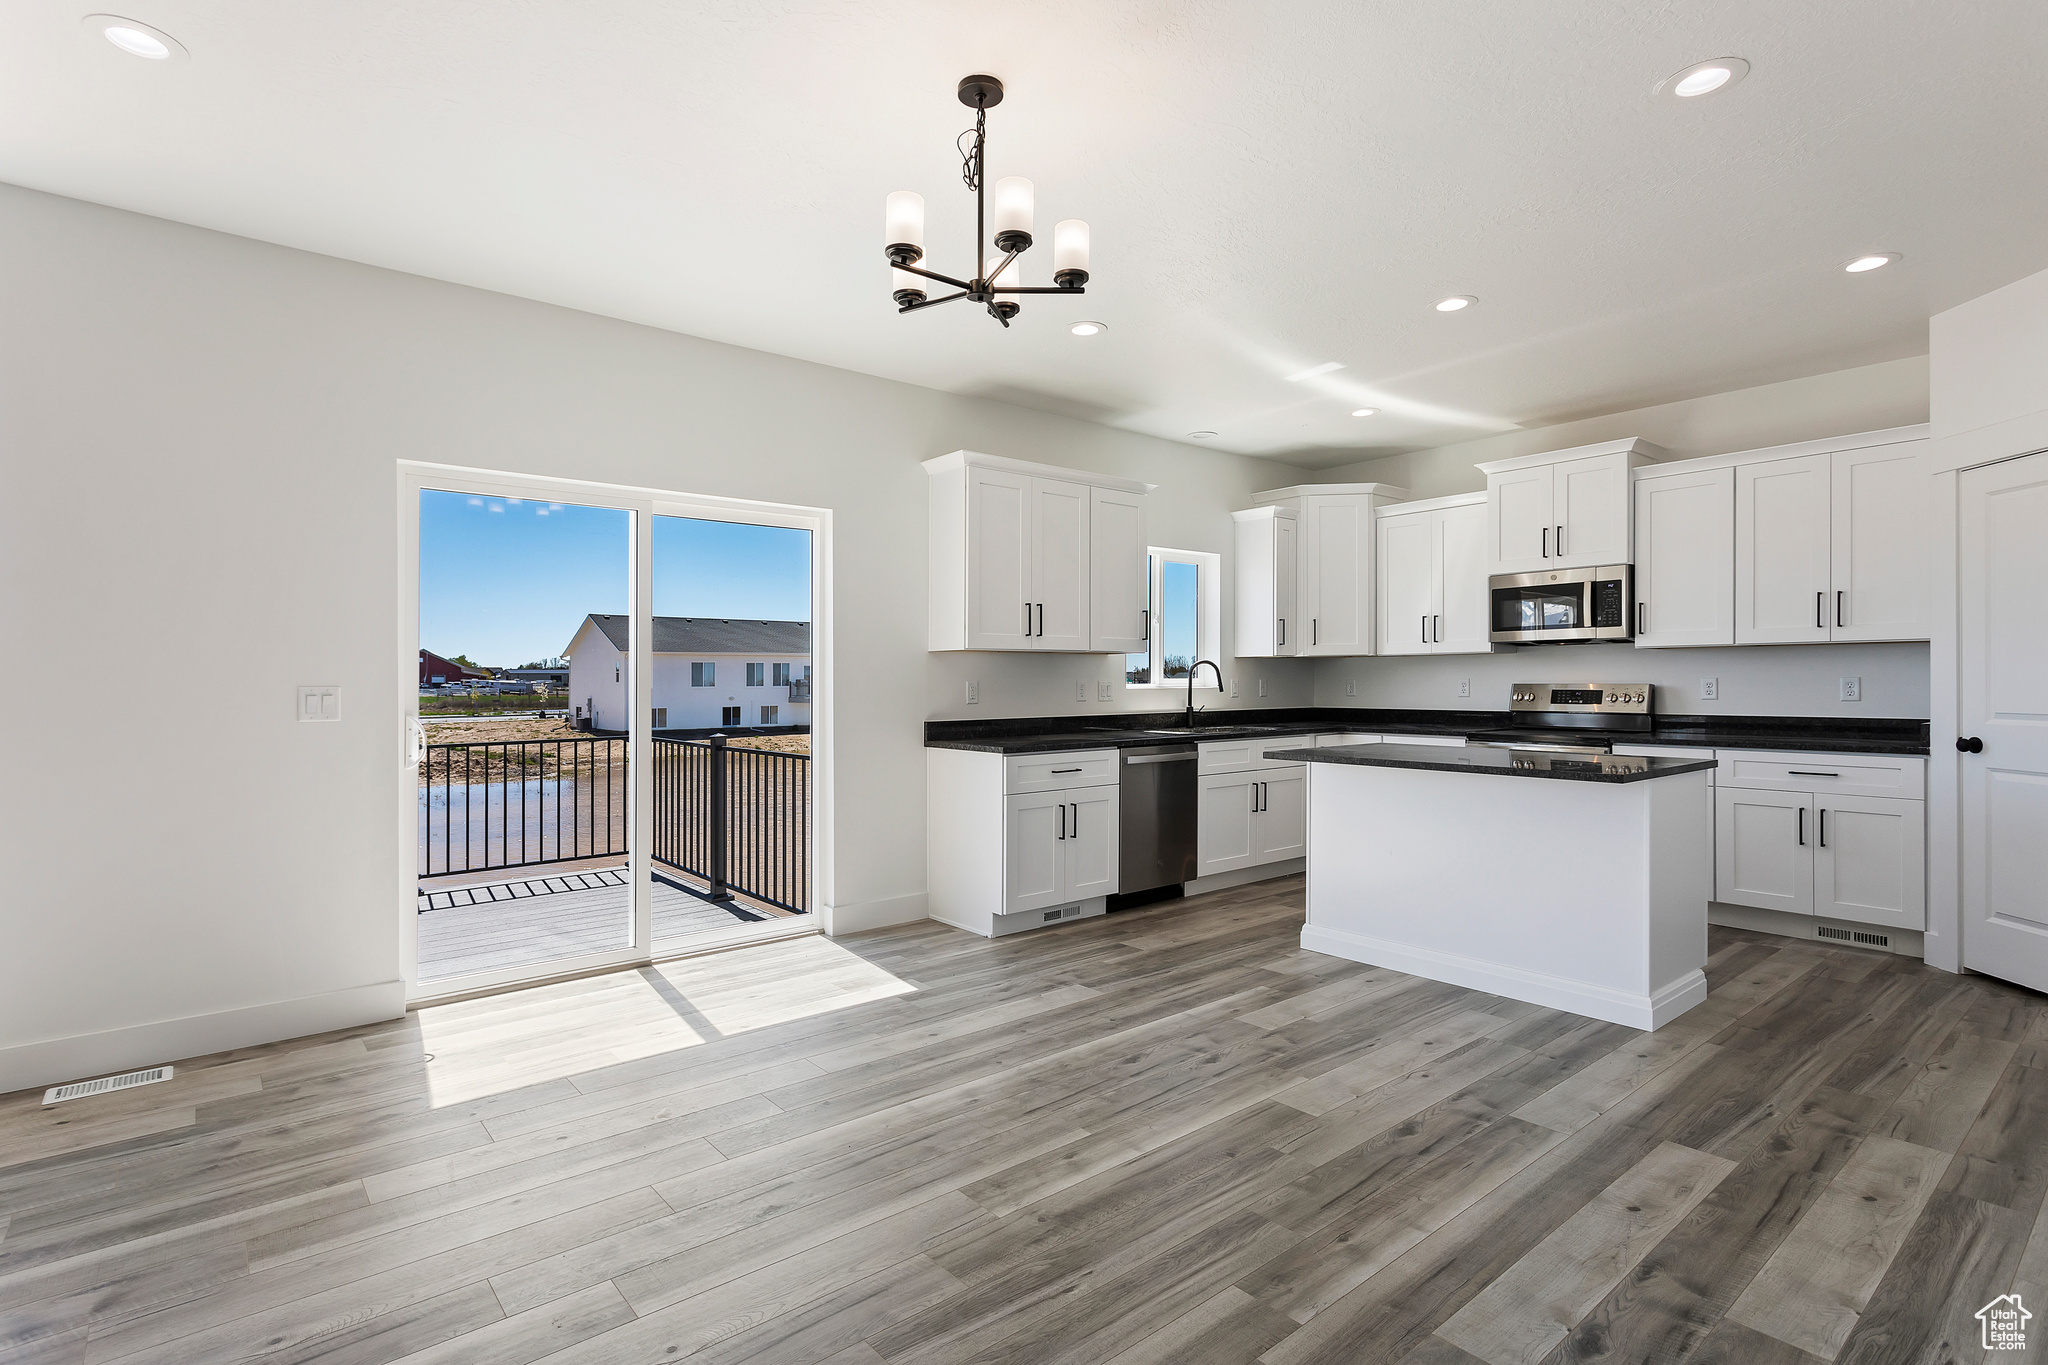 Kitchen featuring pendant lighting, appliances with stainless steel finishes, light hardwood / wood-style flooring, and white cabinets